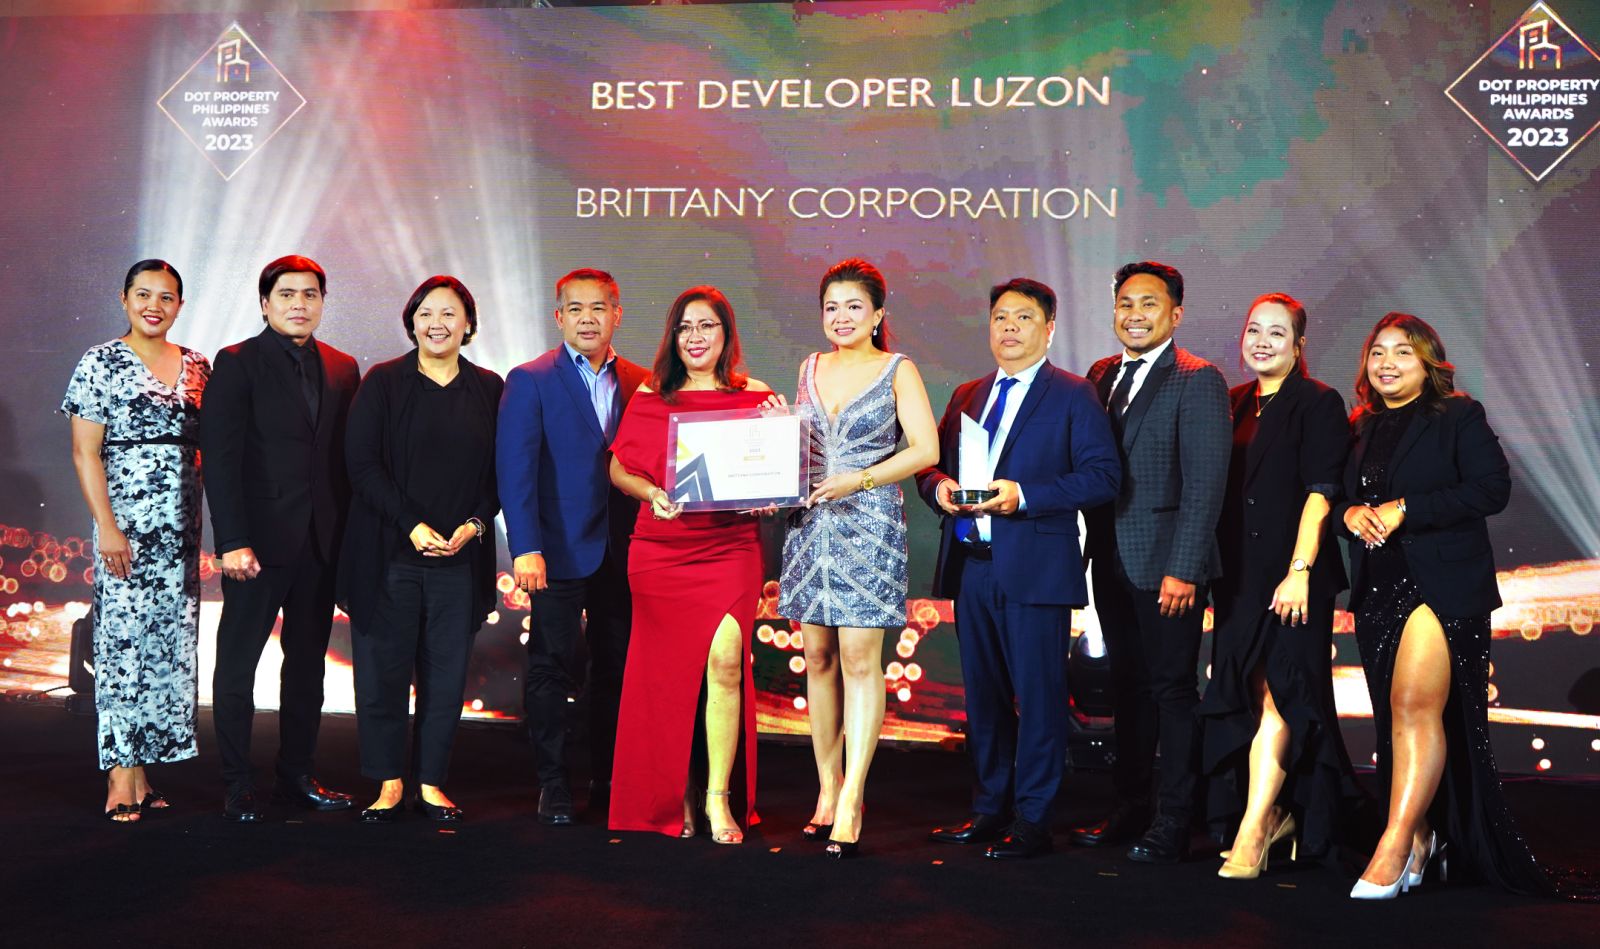 brittany-corporation-bags-best-developer-luzon-award-at-dot-property-philippines-awards-2023